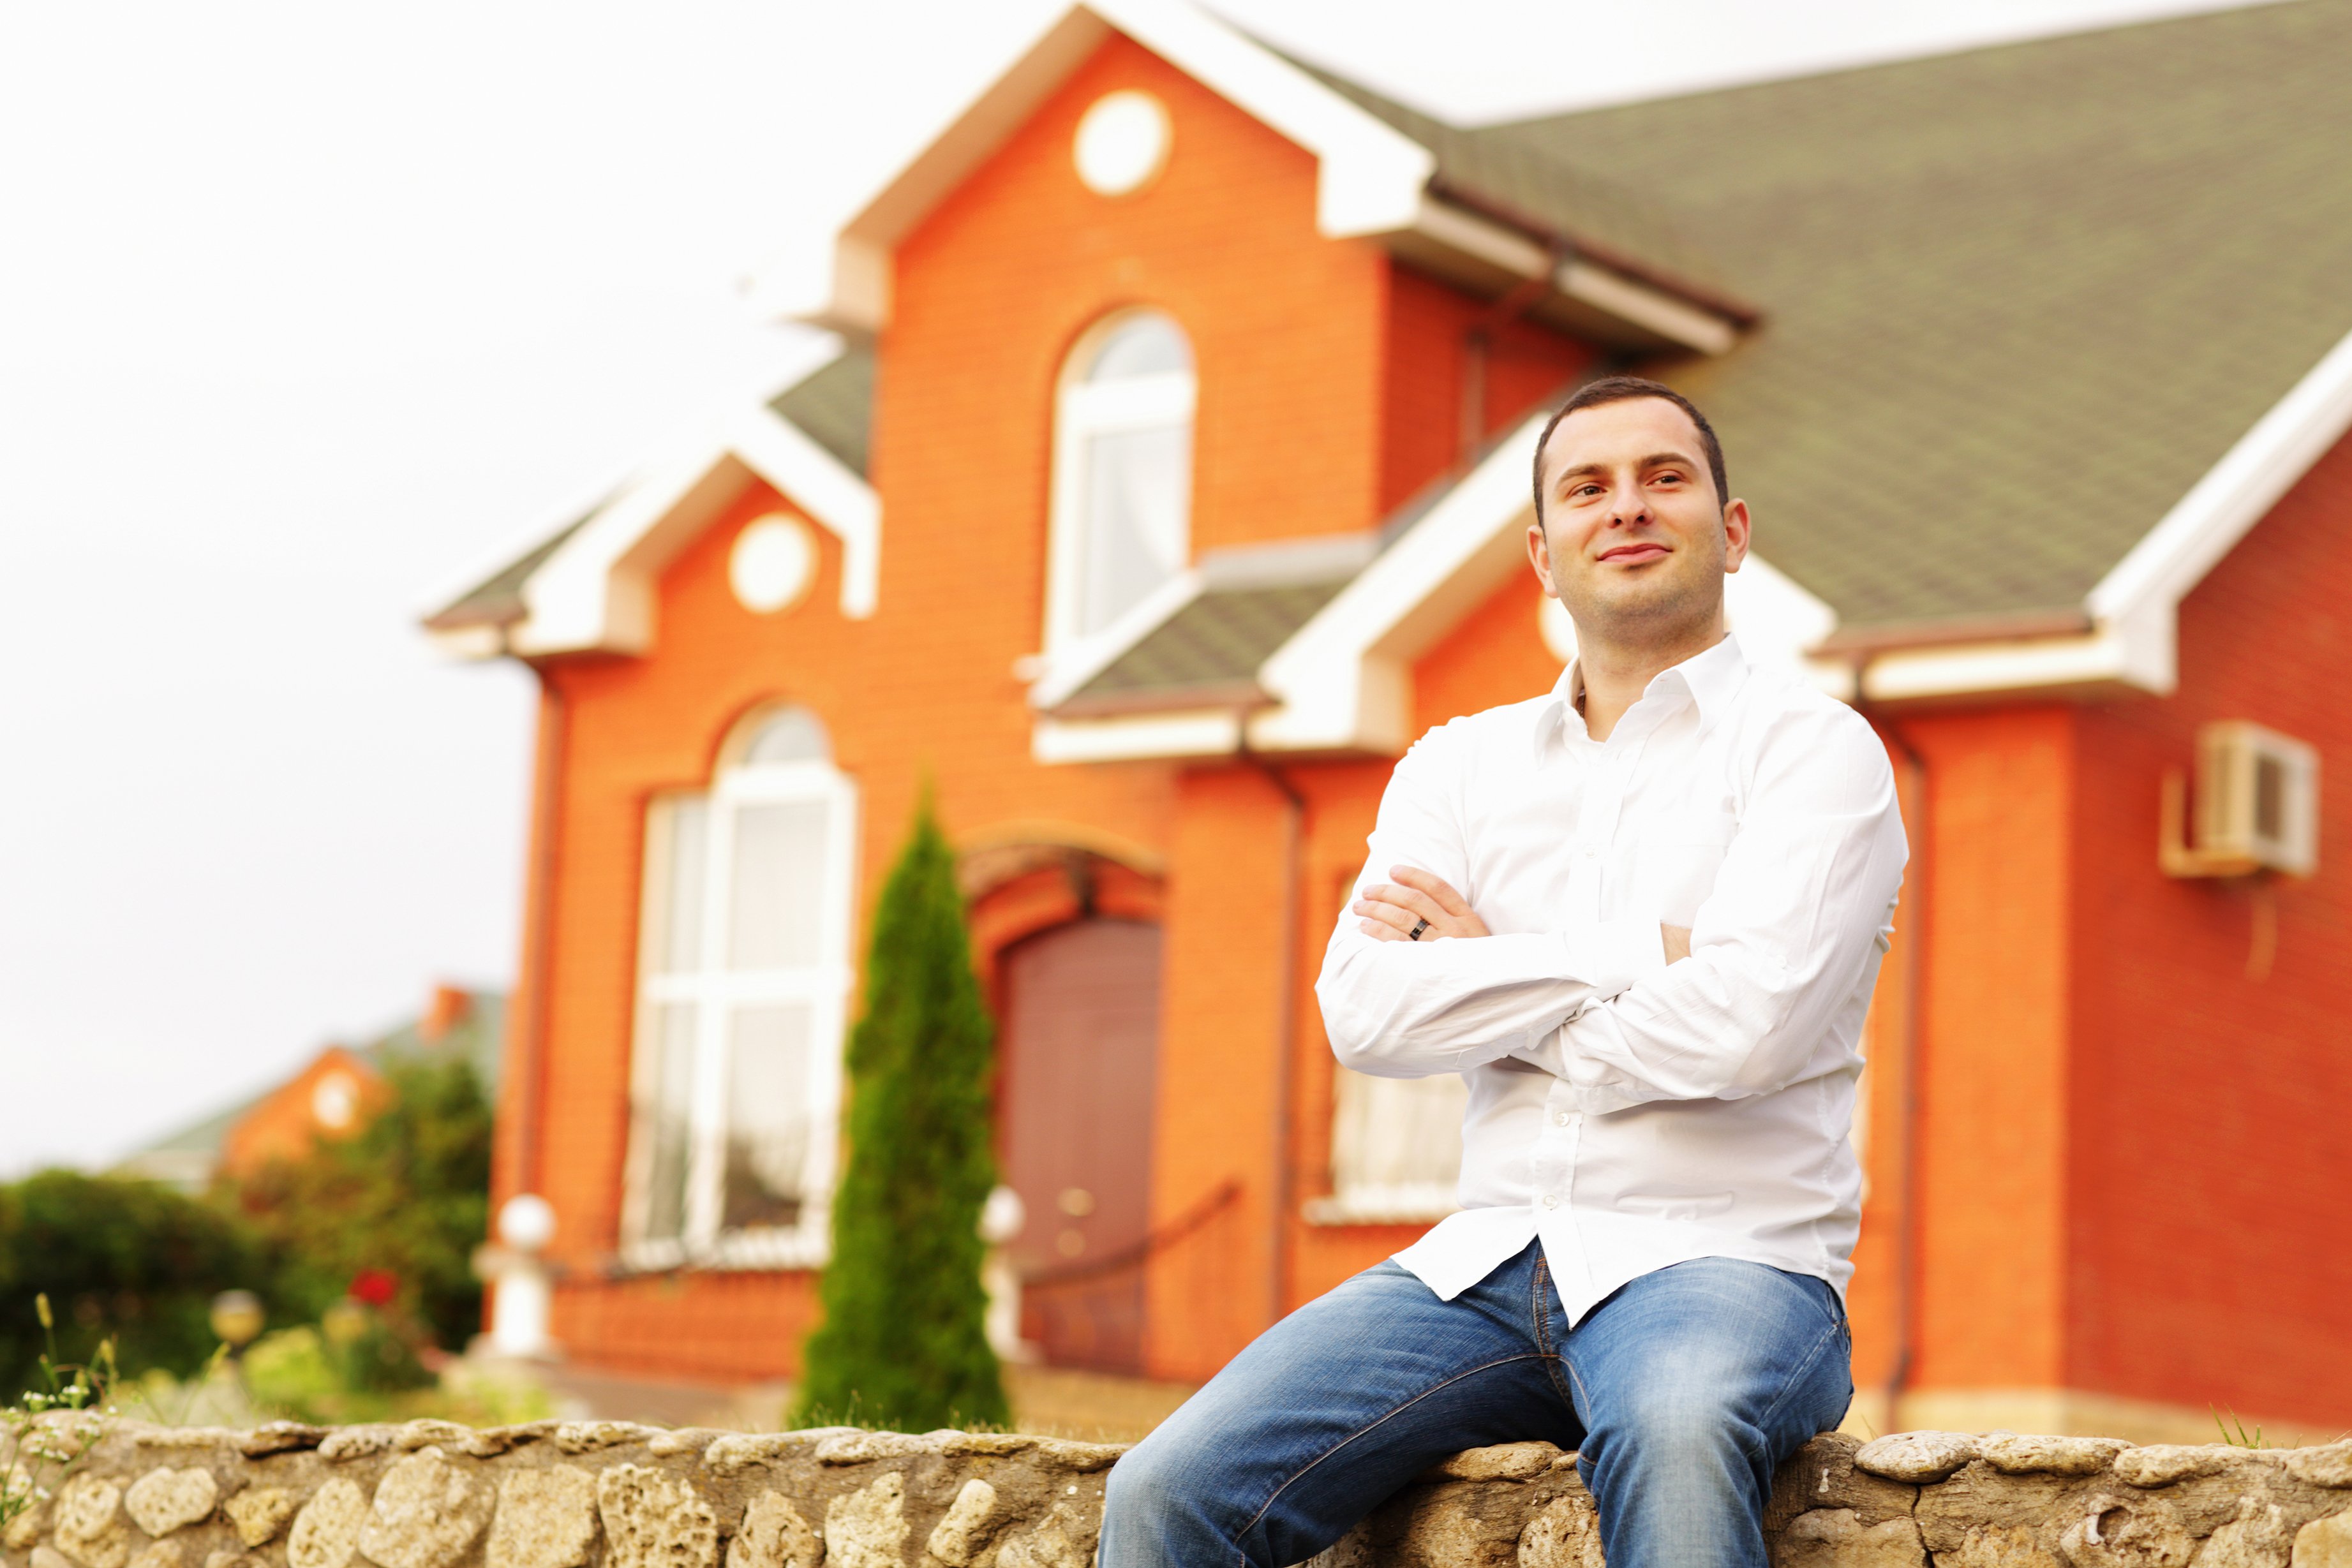 Happy man sitting in front of an orange-bricked house.| Photo: Shutterstock